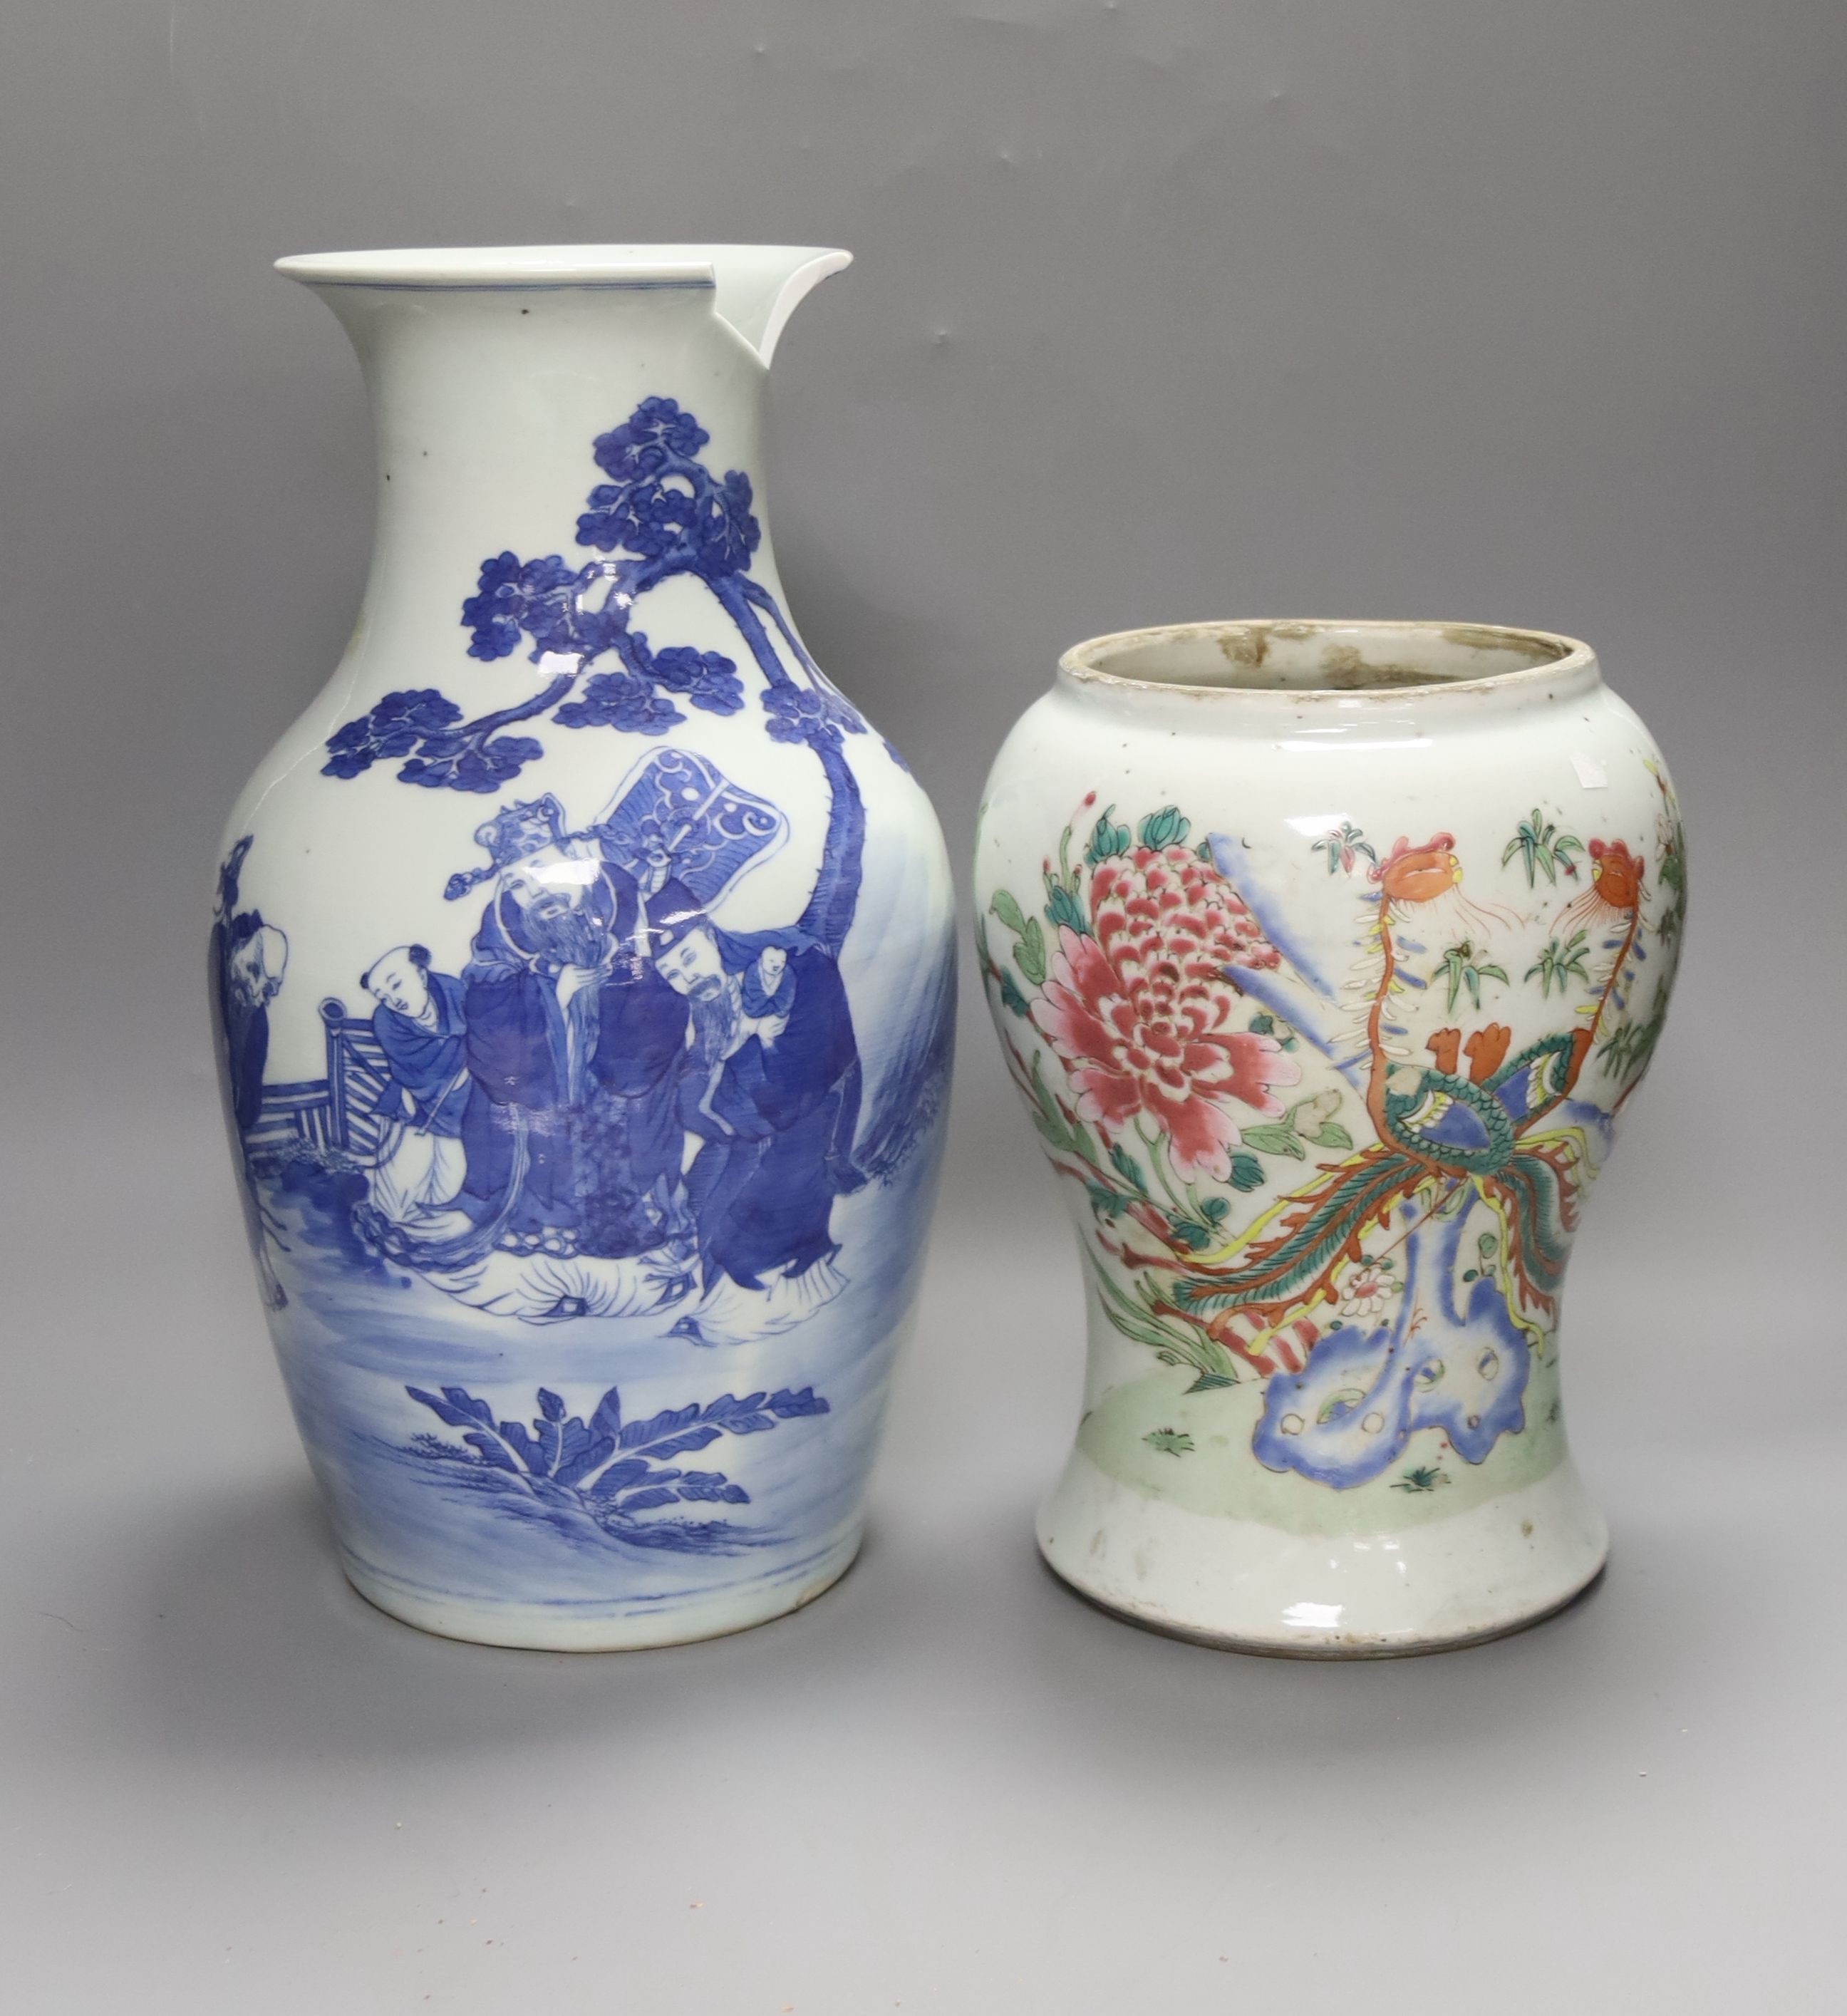 A Chinese blue and white 'Immortals' vase, 18th/19th century, damage, 34.5cm and a Chinese Yongzheng